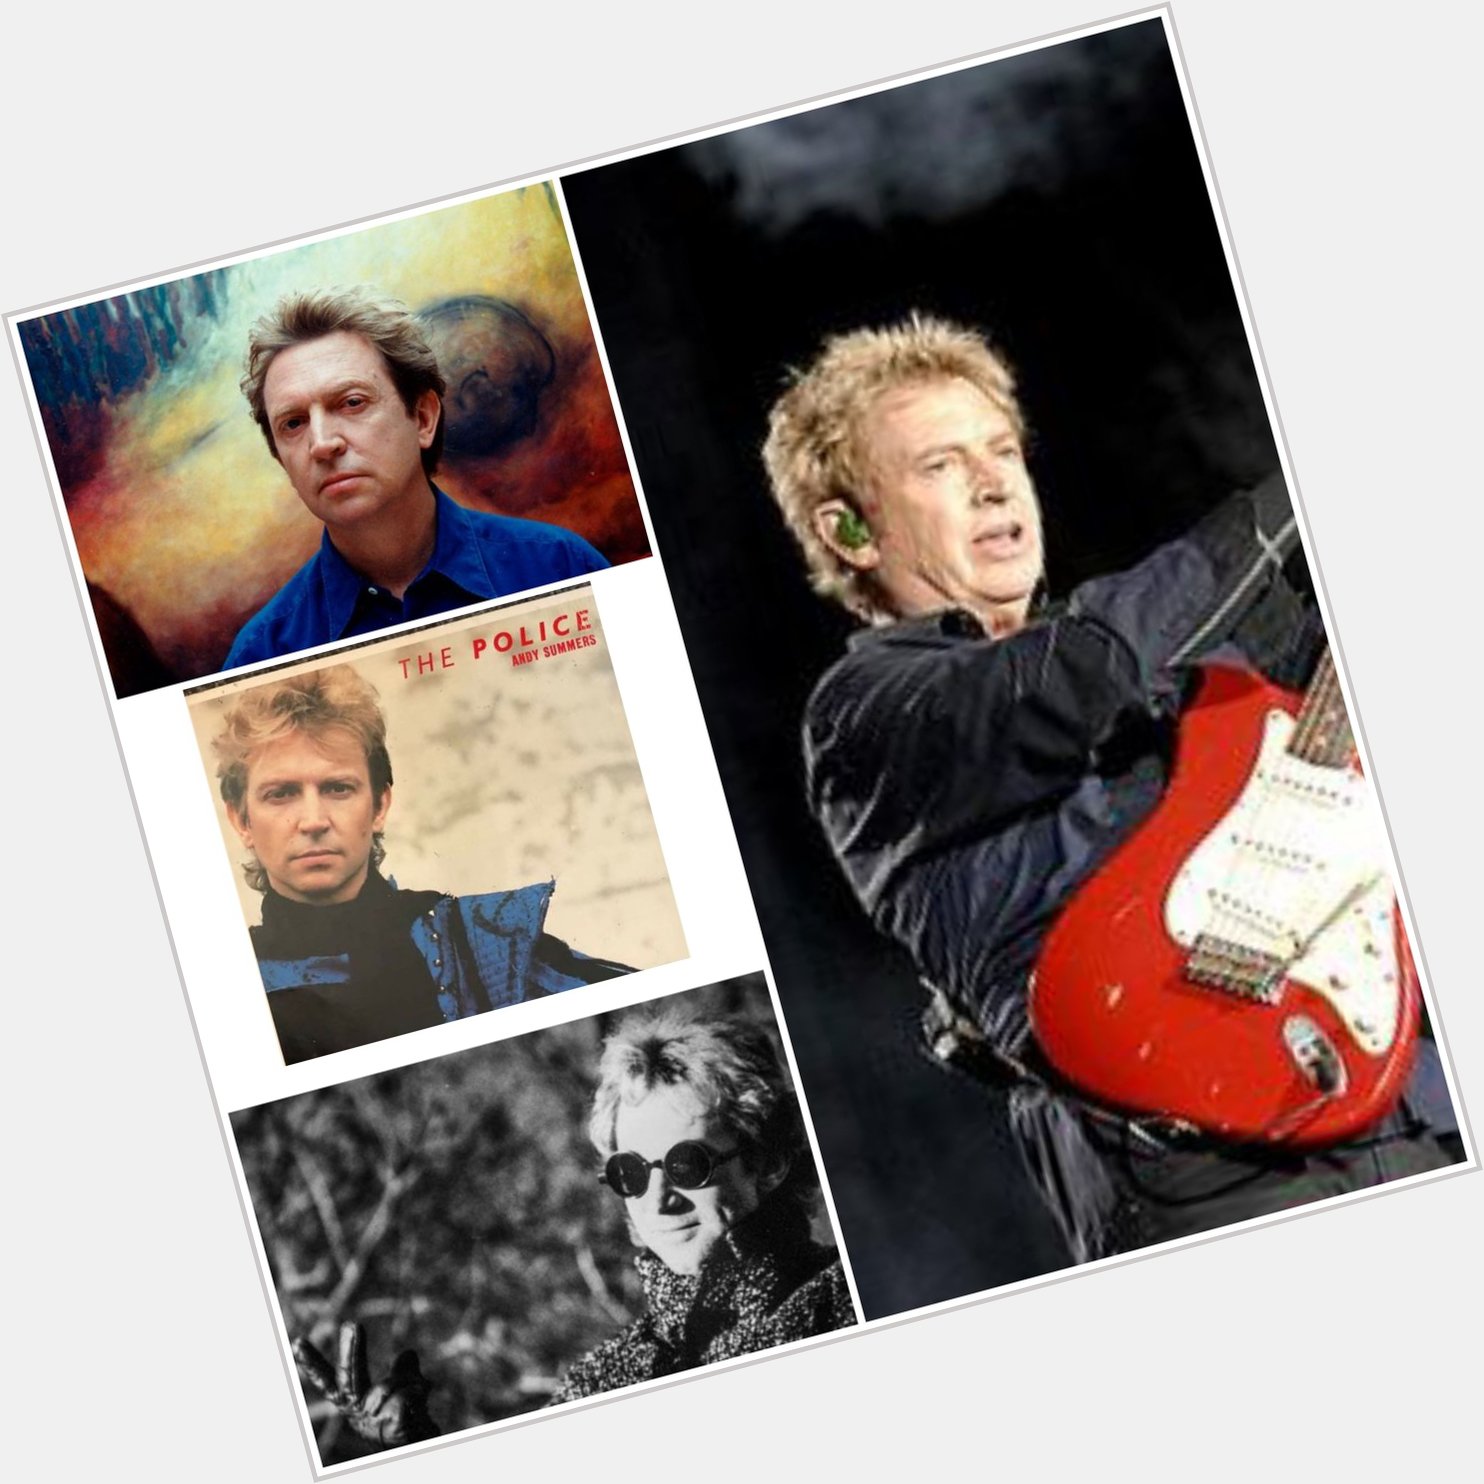 * 31.12.1942
Happy birthday Andy Summers     